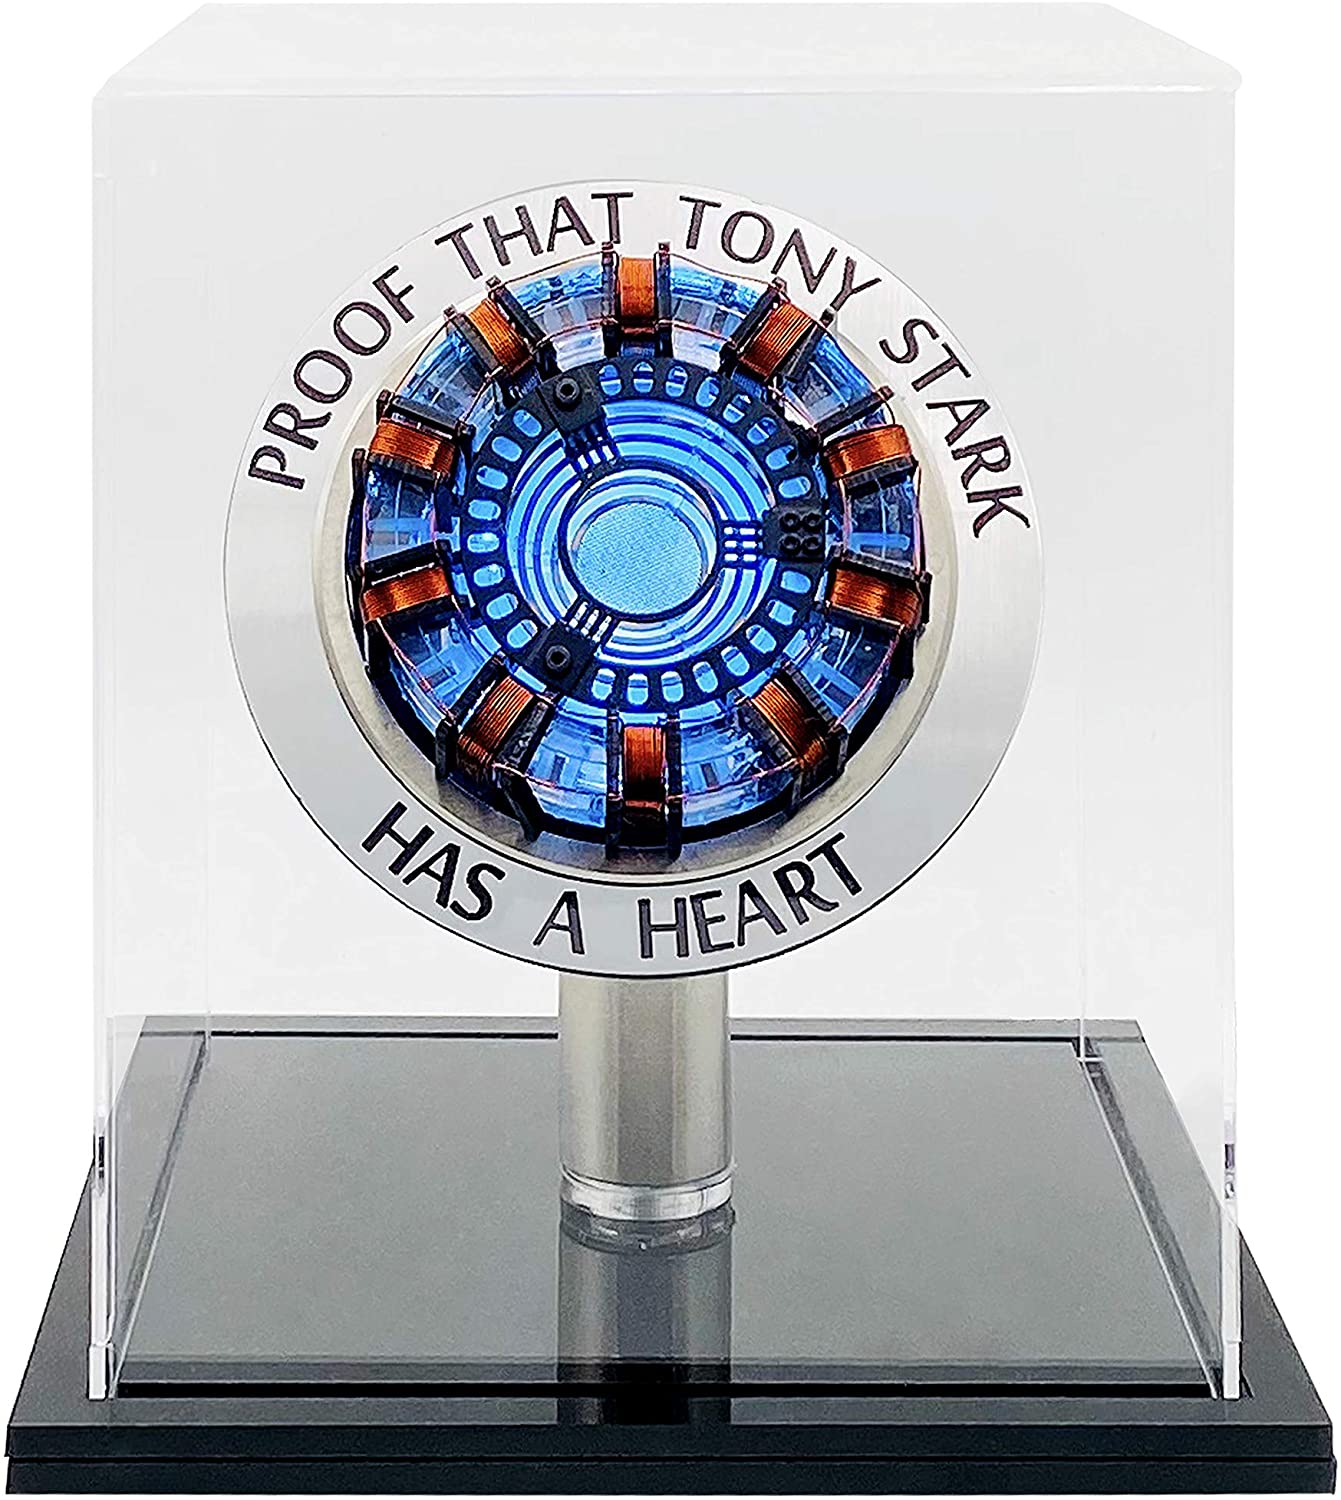 Tony Stark Heart Collectors gifts for ironman fans